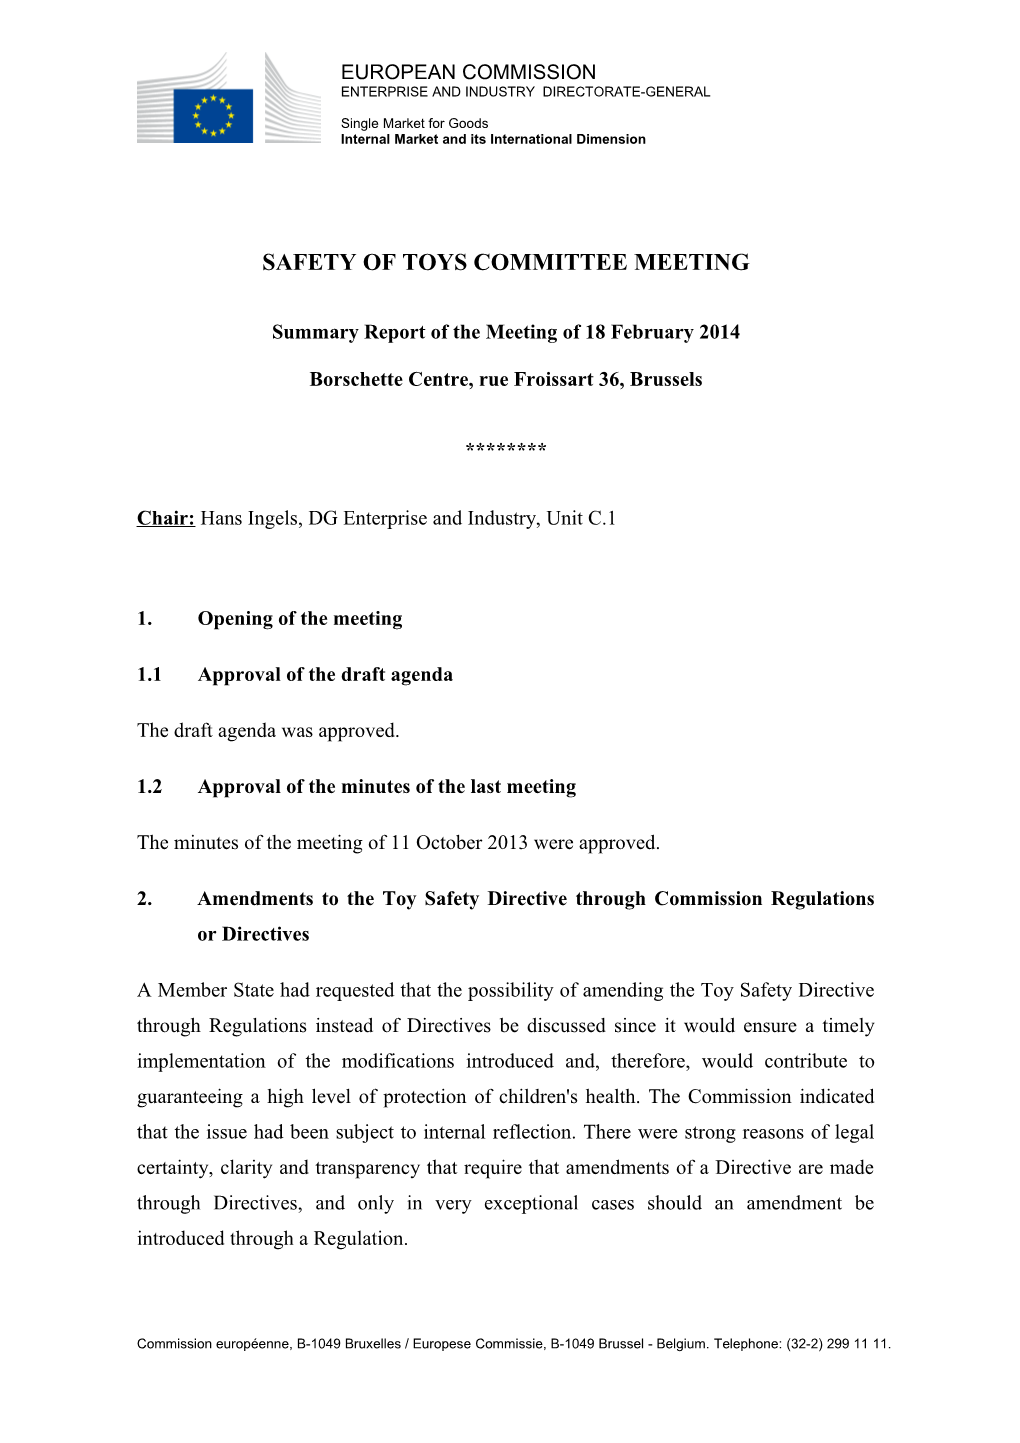 Safety of Toys Committee Meeting